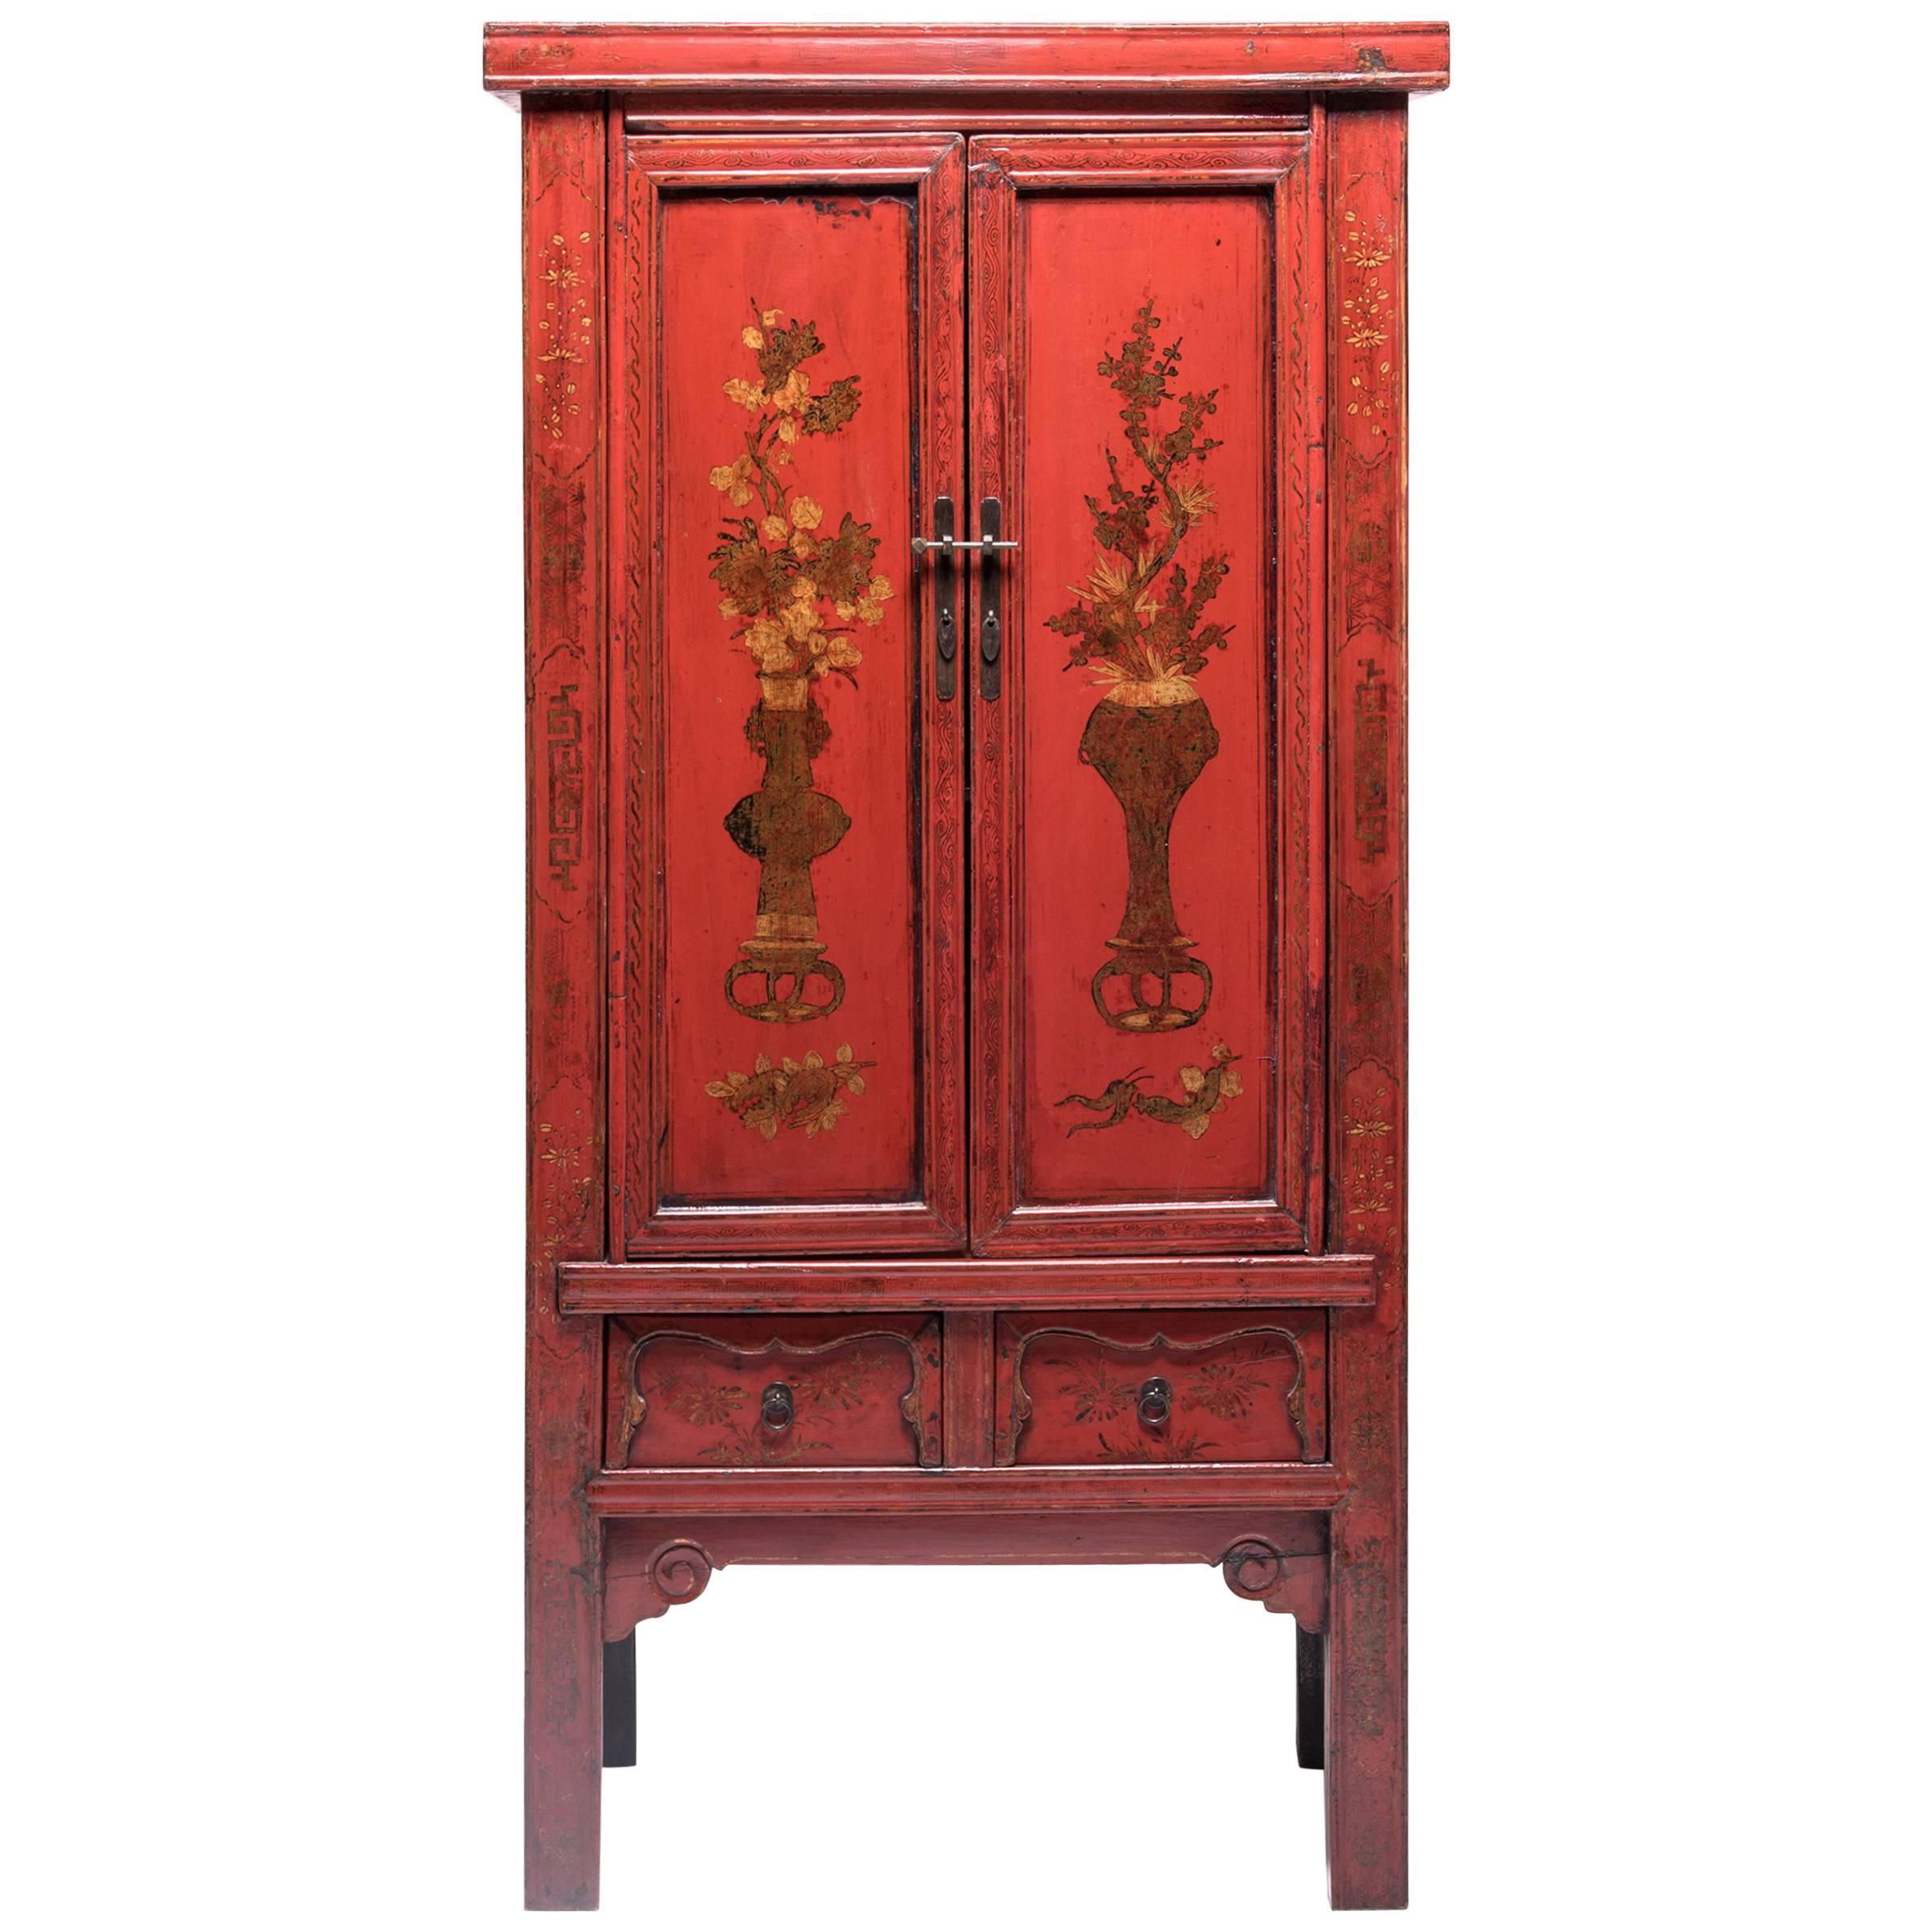 Chinese Red Lacquer Painted Cabinet, c. 1850